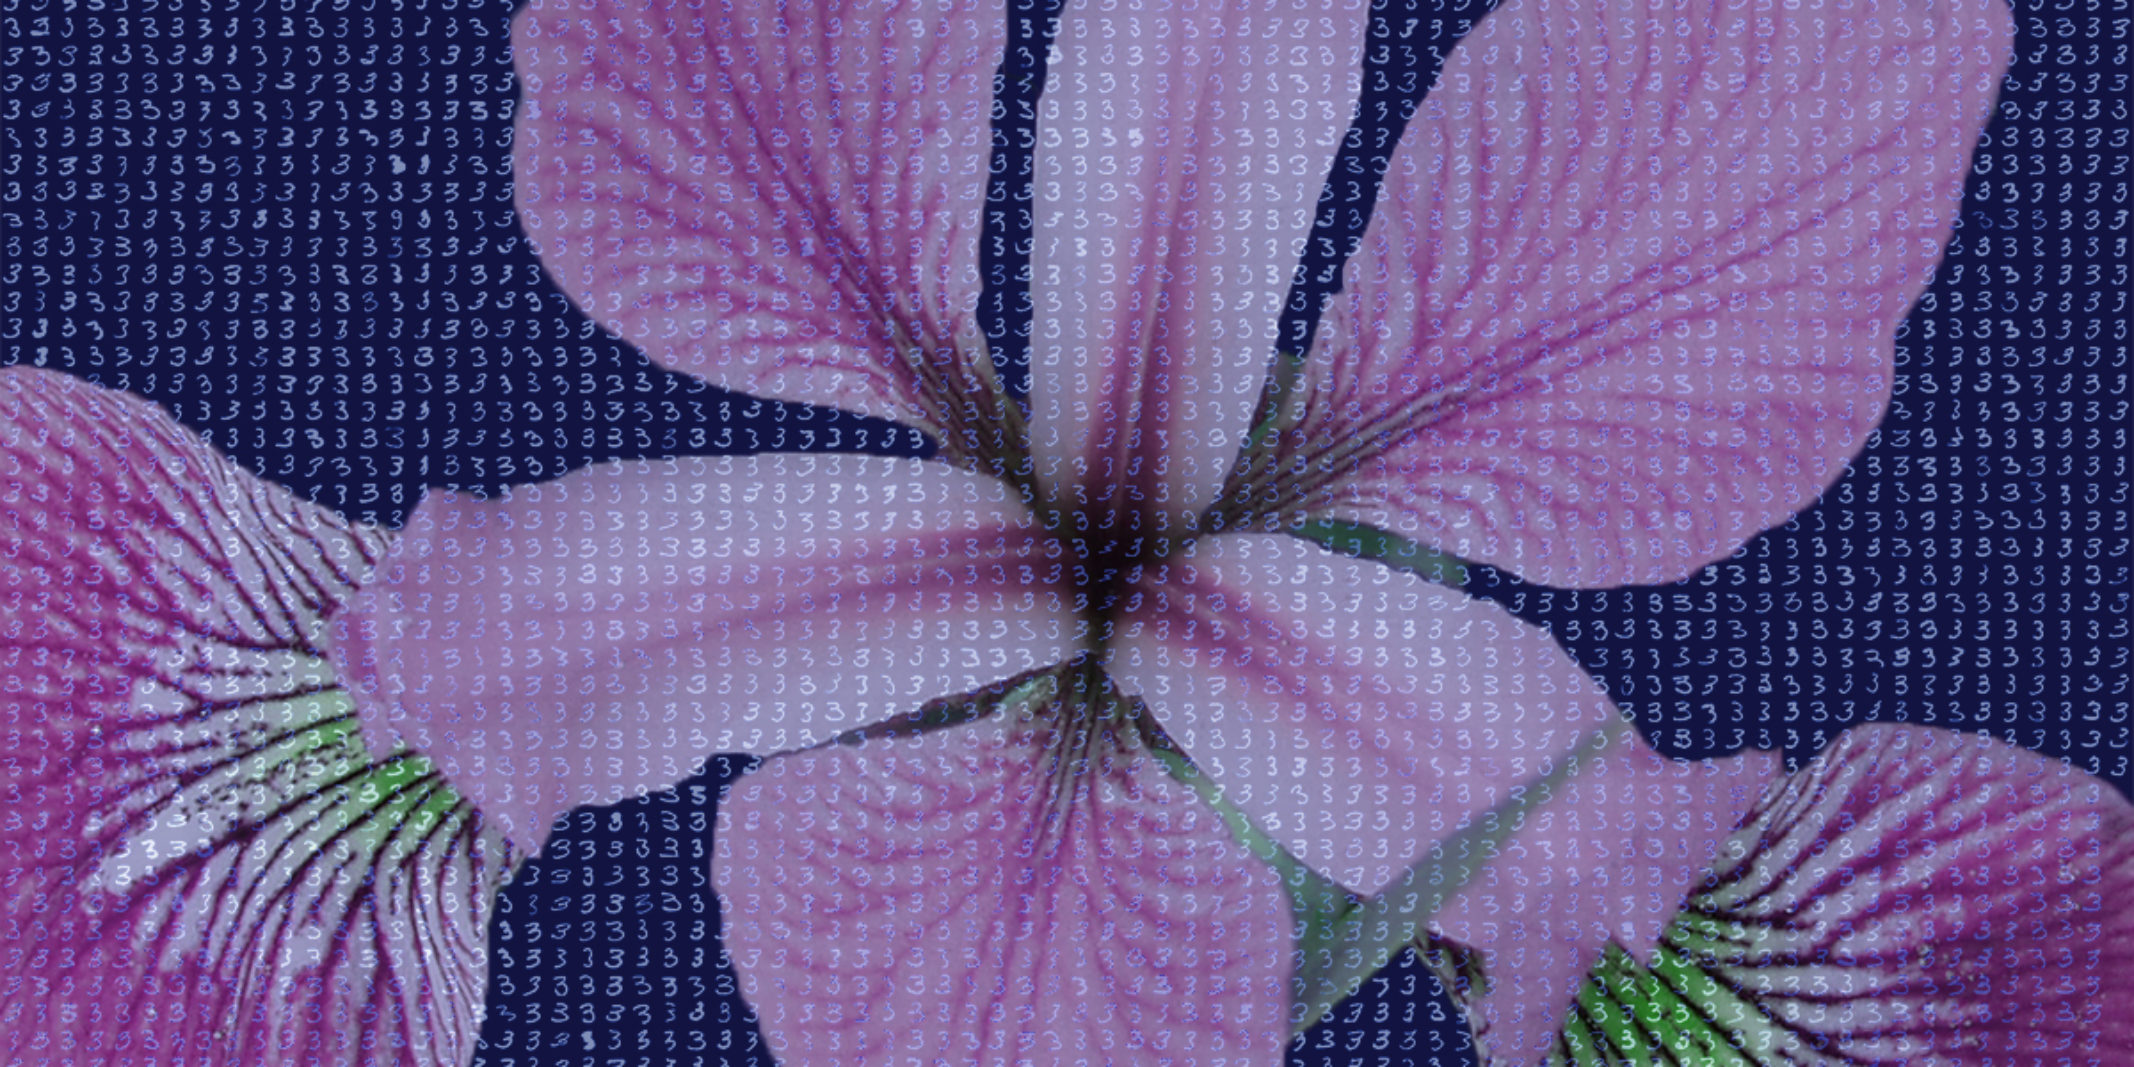 purple flower with 3s written all over